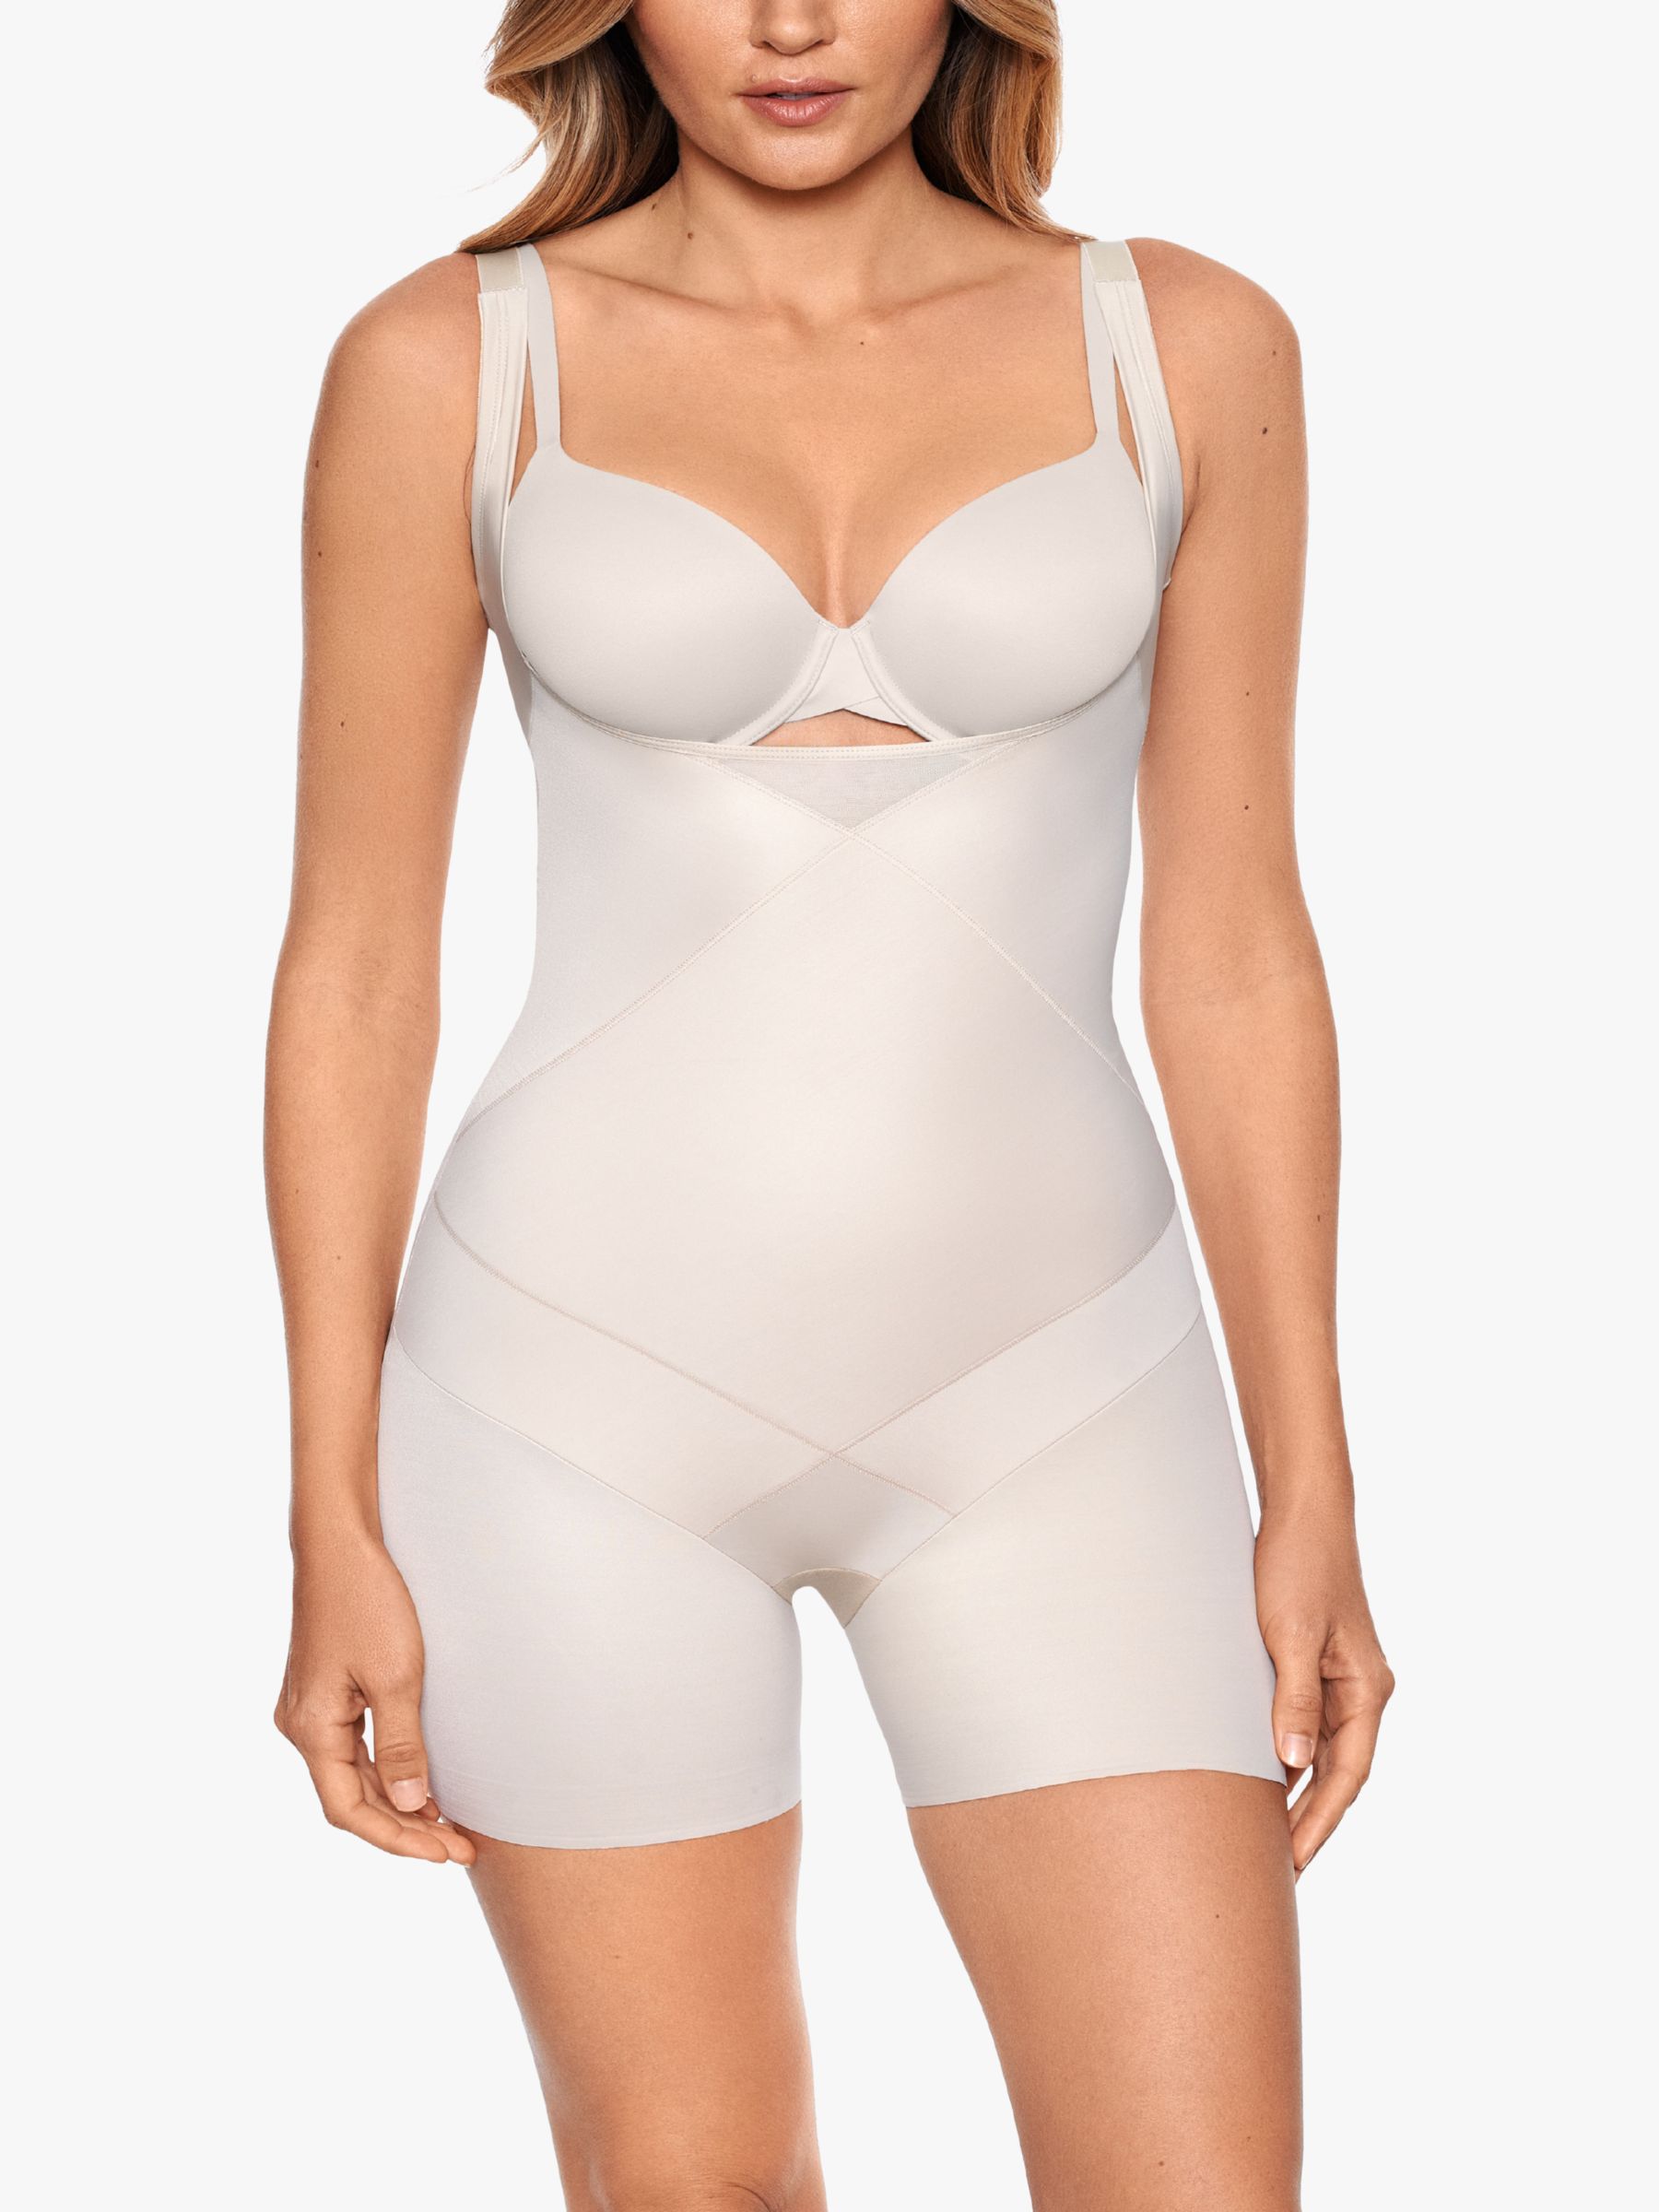 SPANX Assets Women's Remarkable Results Open-Bust Brief Bodysuit - Beige L,  Nude, Large